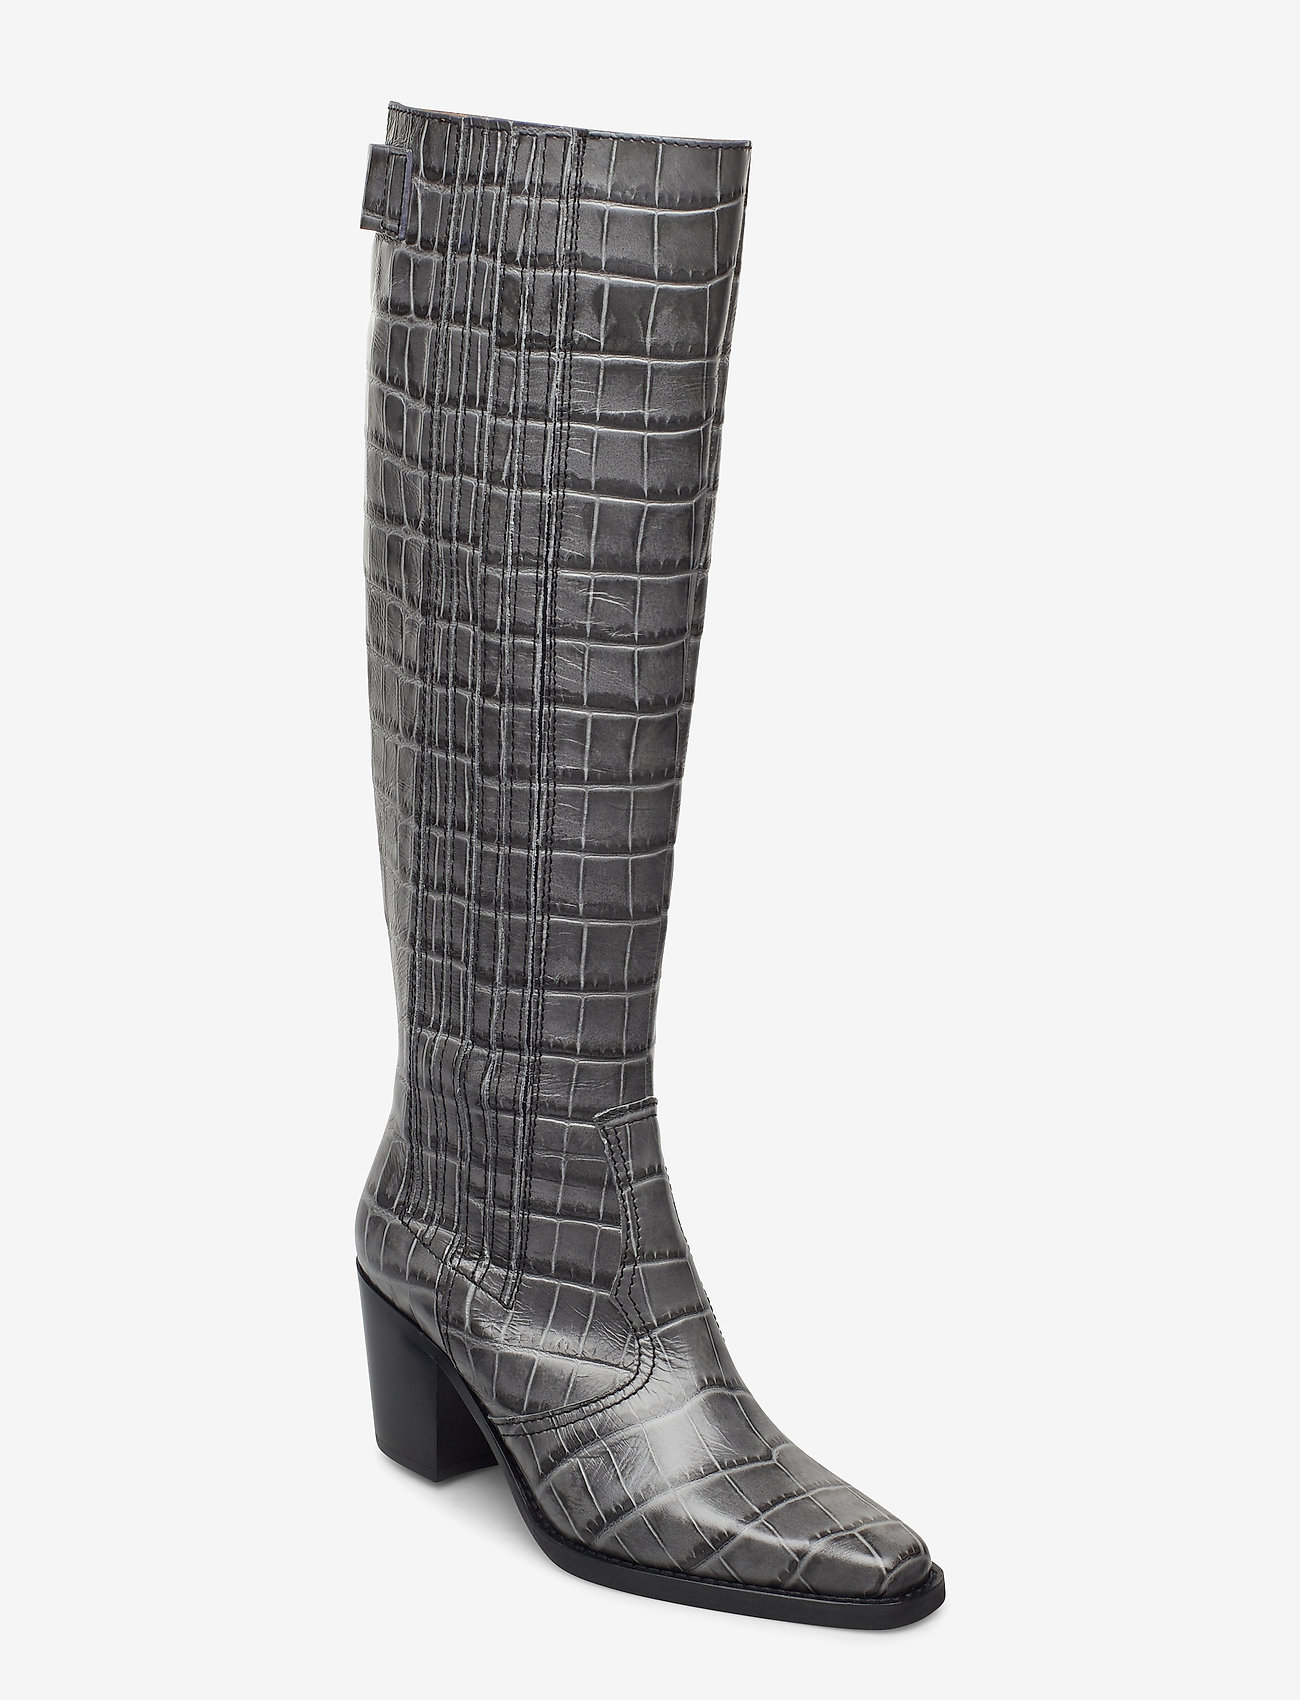 western knee high boots